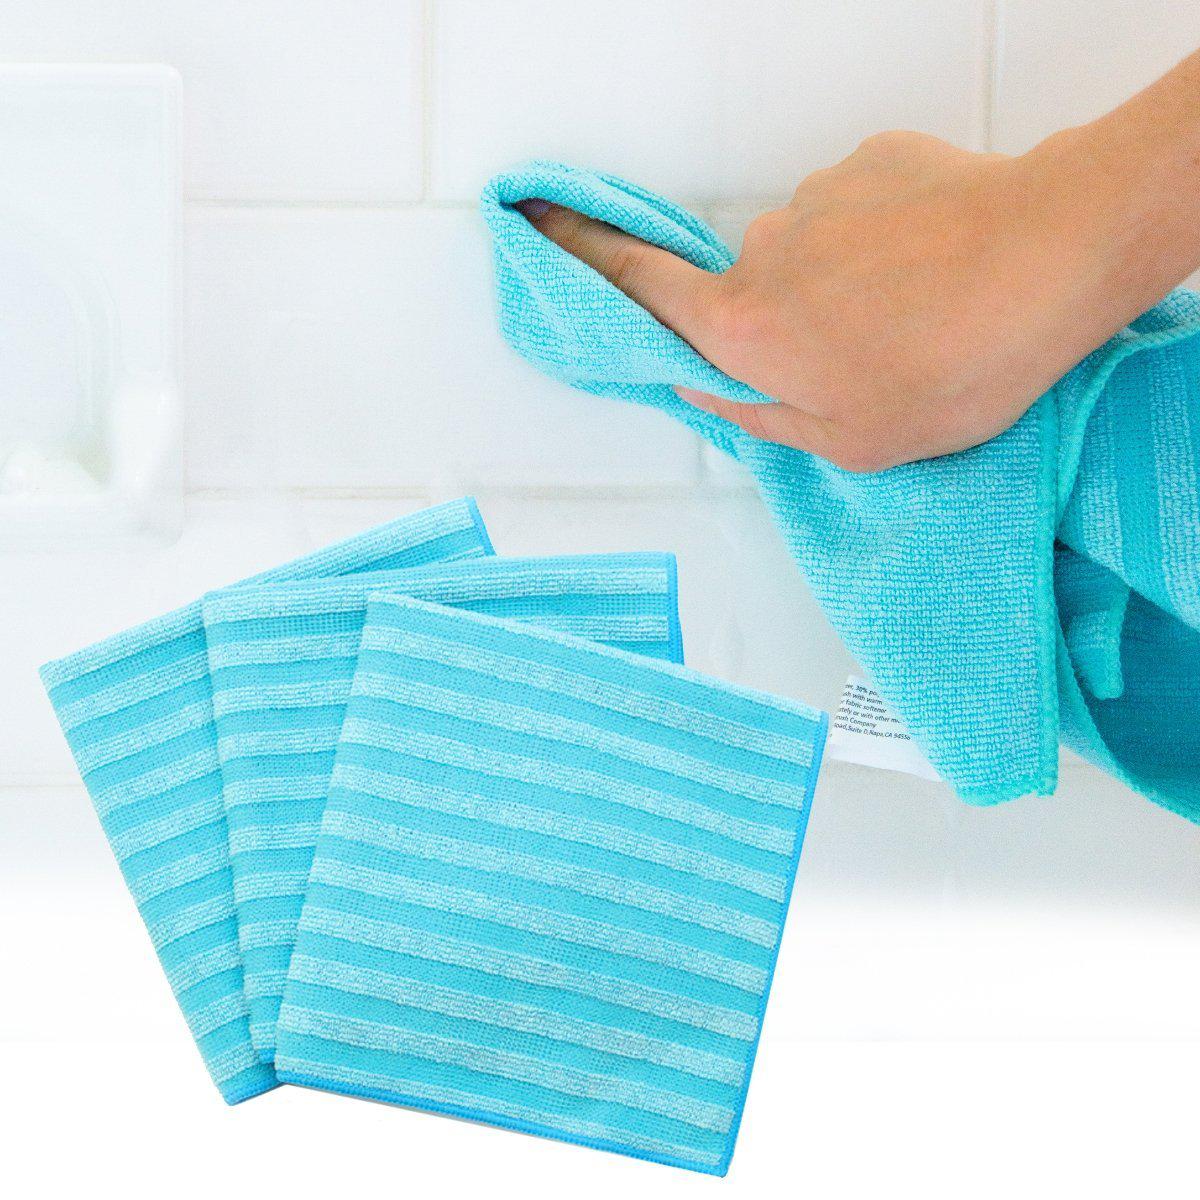 Microfiber Cleaning Cloths, Microfiber Kitchen Towels